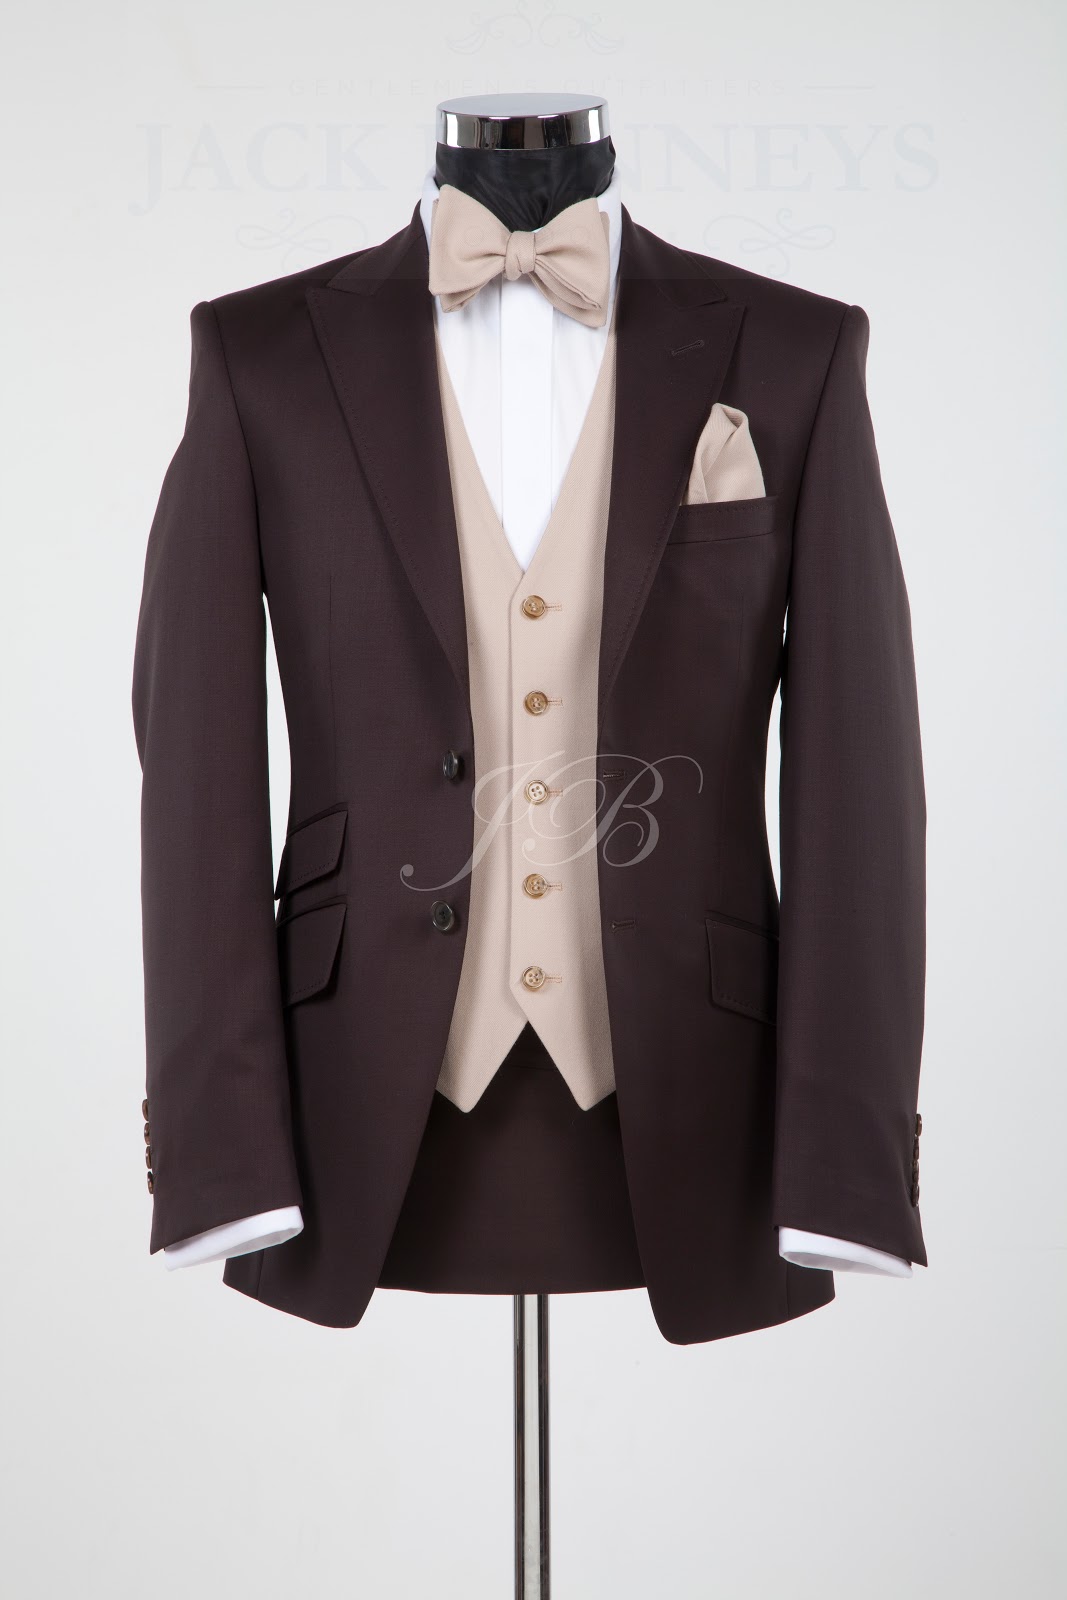 The Bunney Blog Vintage Wedding Suit Hire *New for 2013